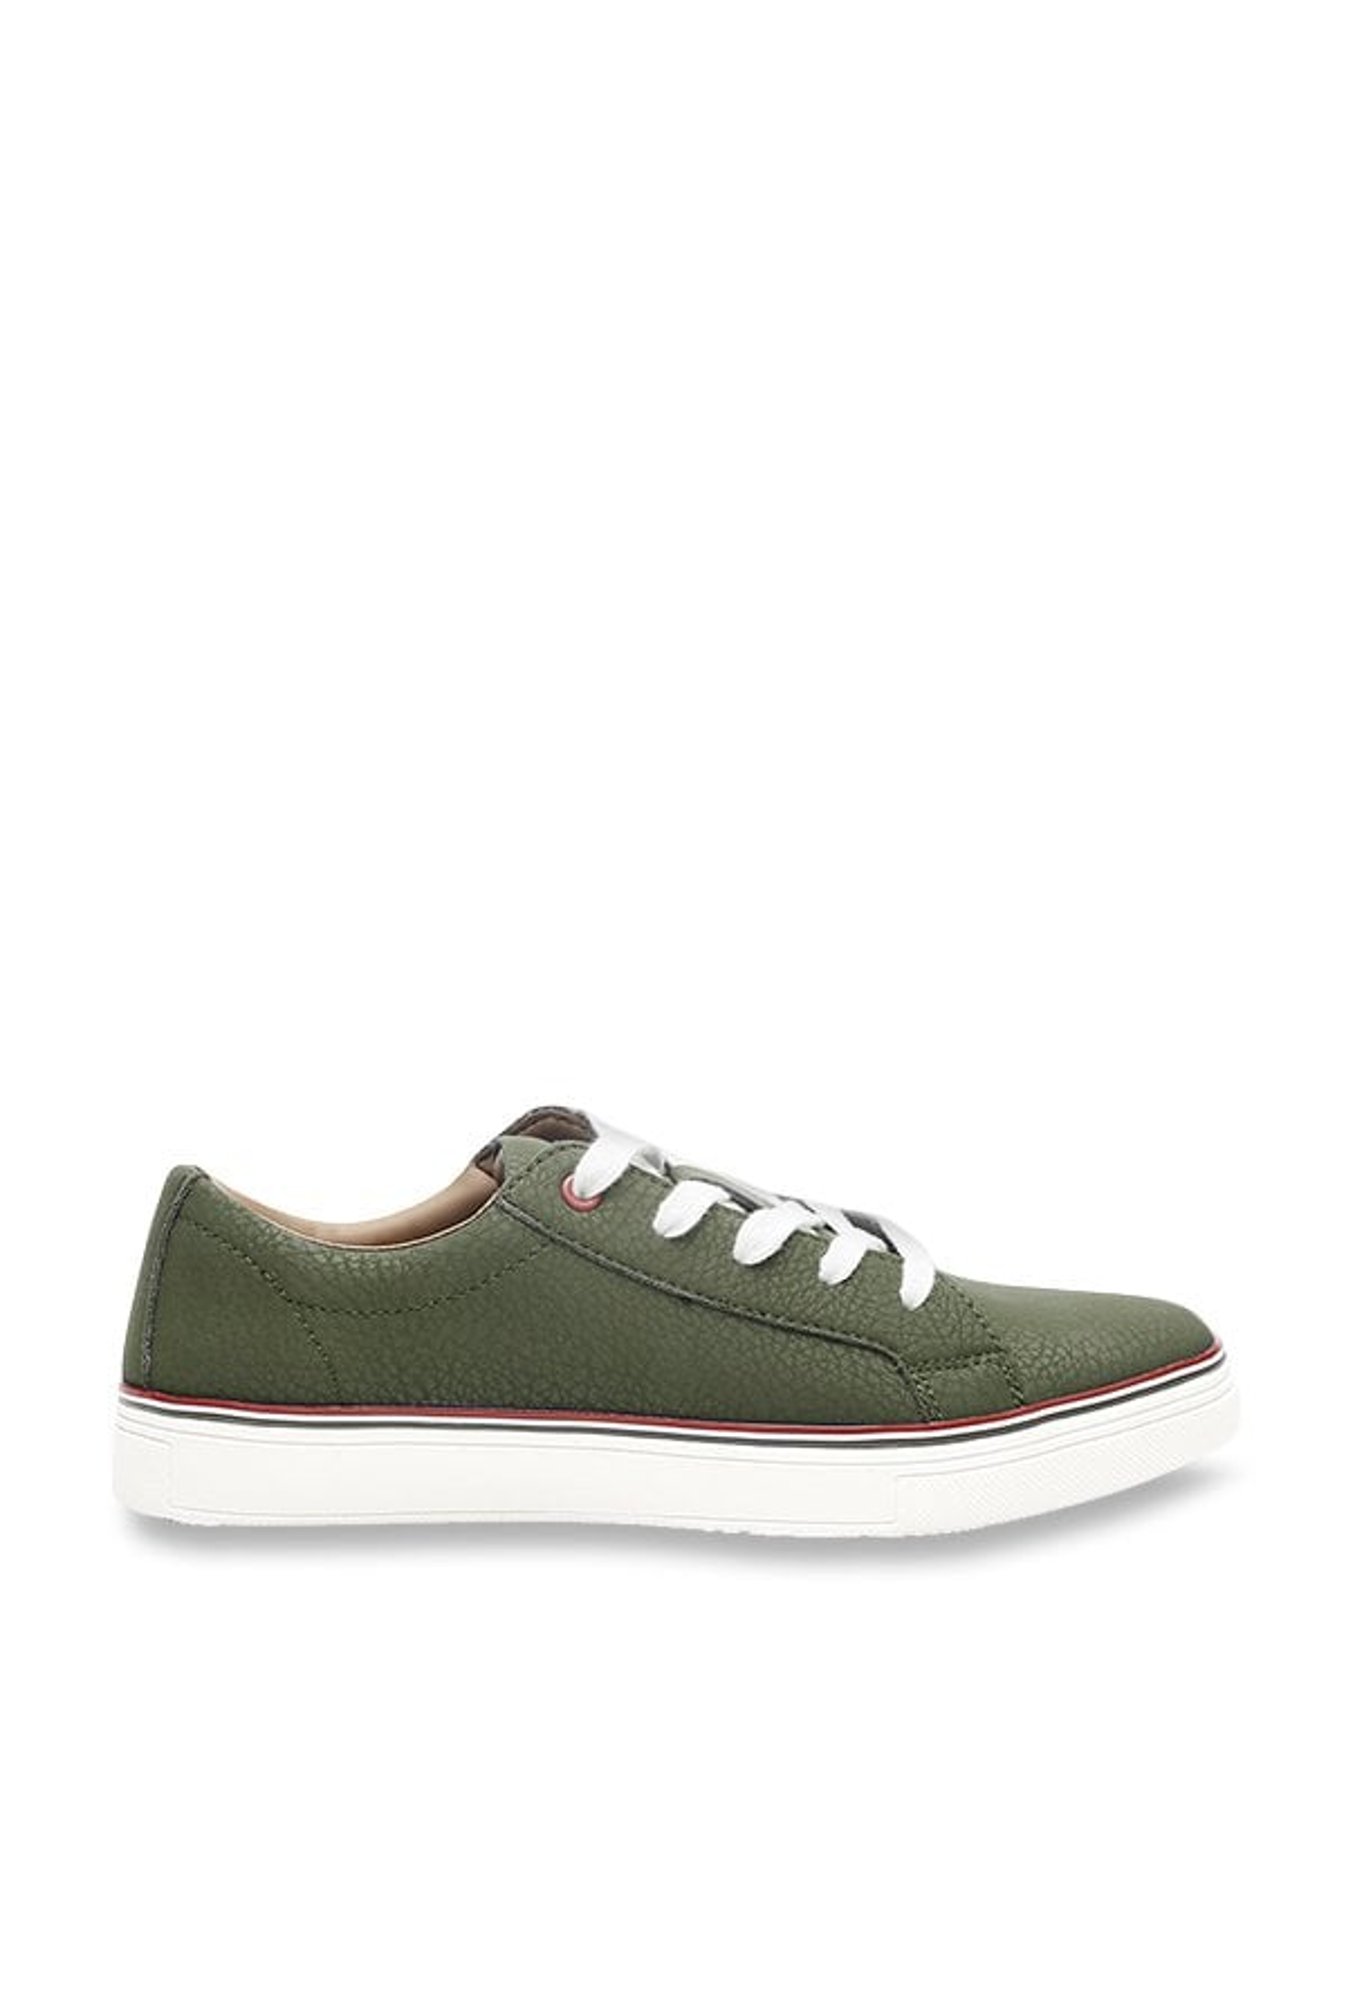 Benetton Olive Casual Sneakers 